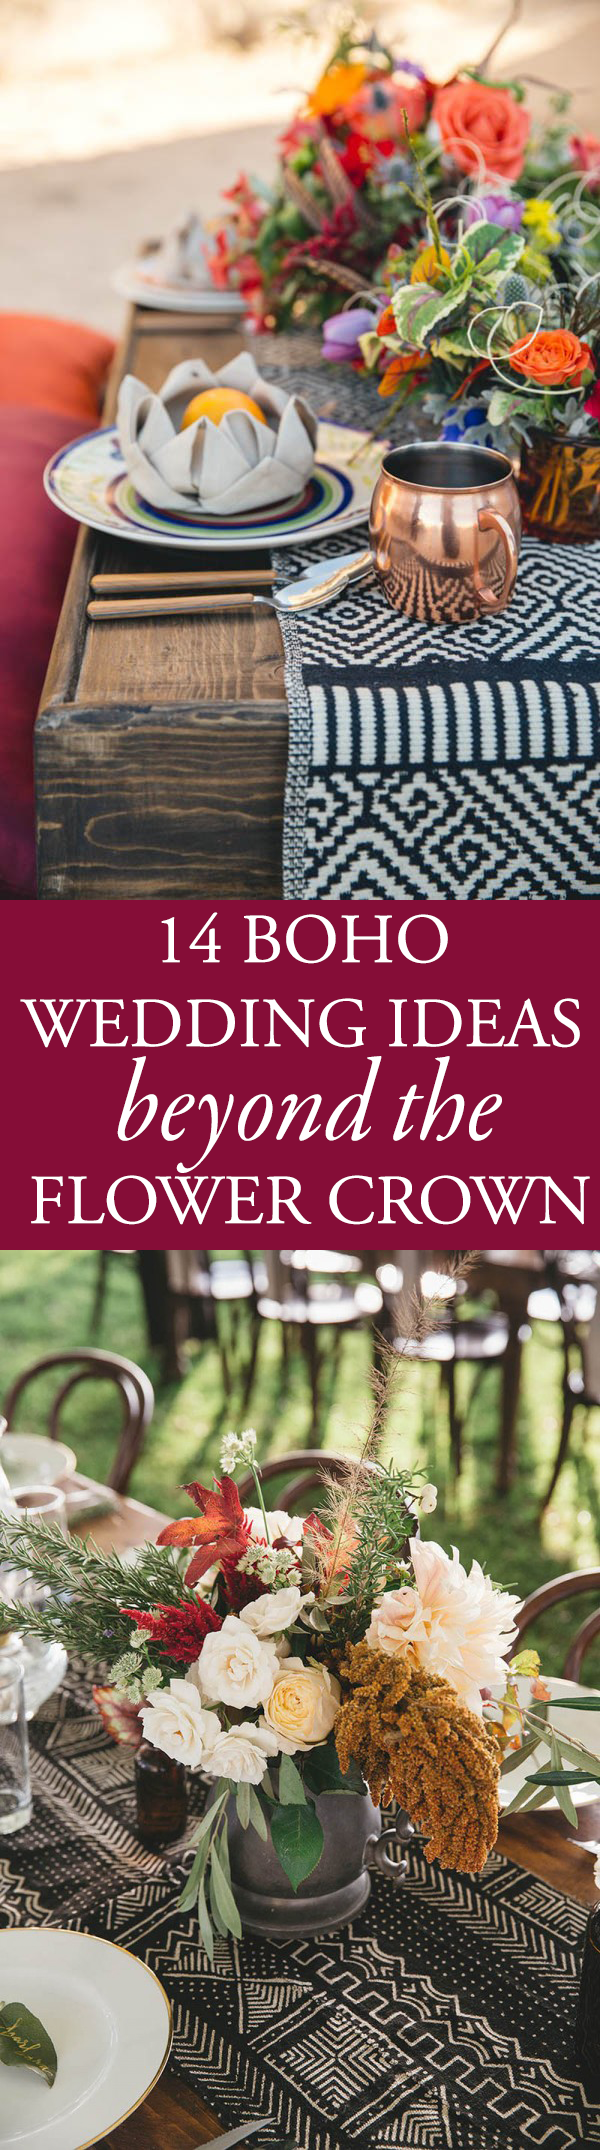 Beyond Flower Crowns ? Bohemian Wedding Ideas for Your Big Day